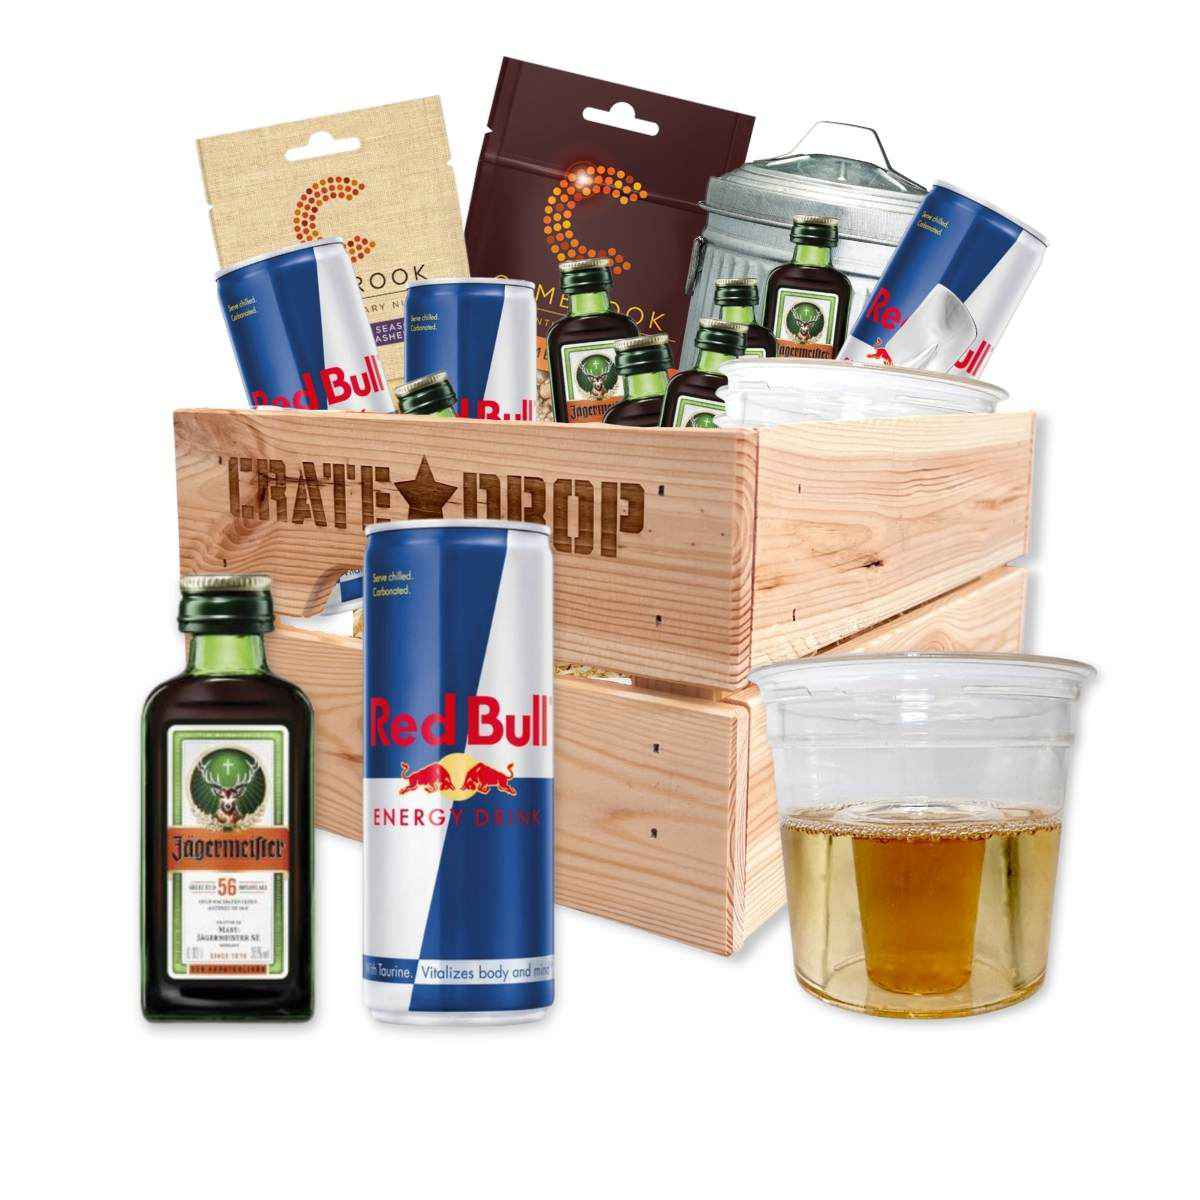 red bull and jagermeister gift set with snacks and cups in wood gift crate